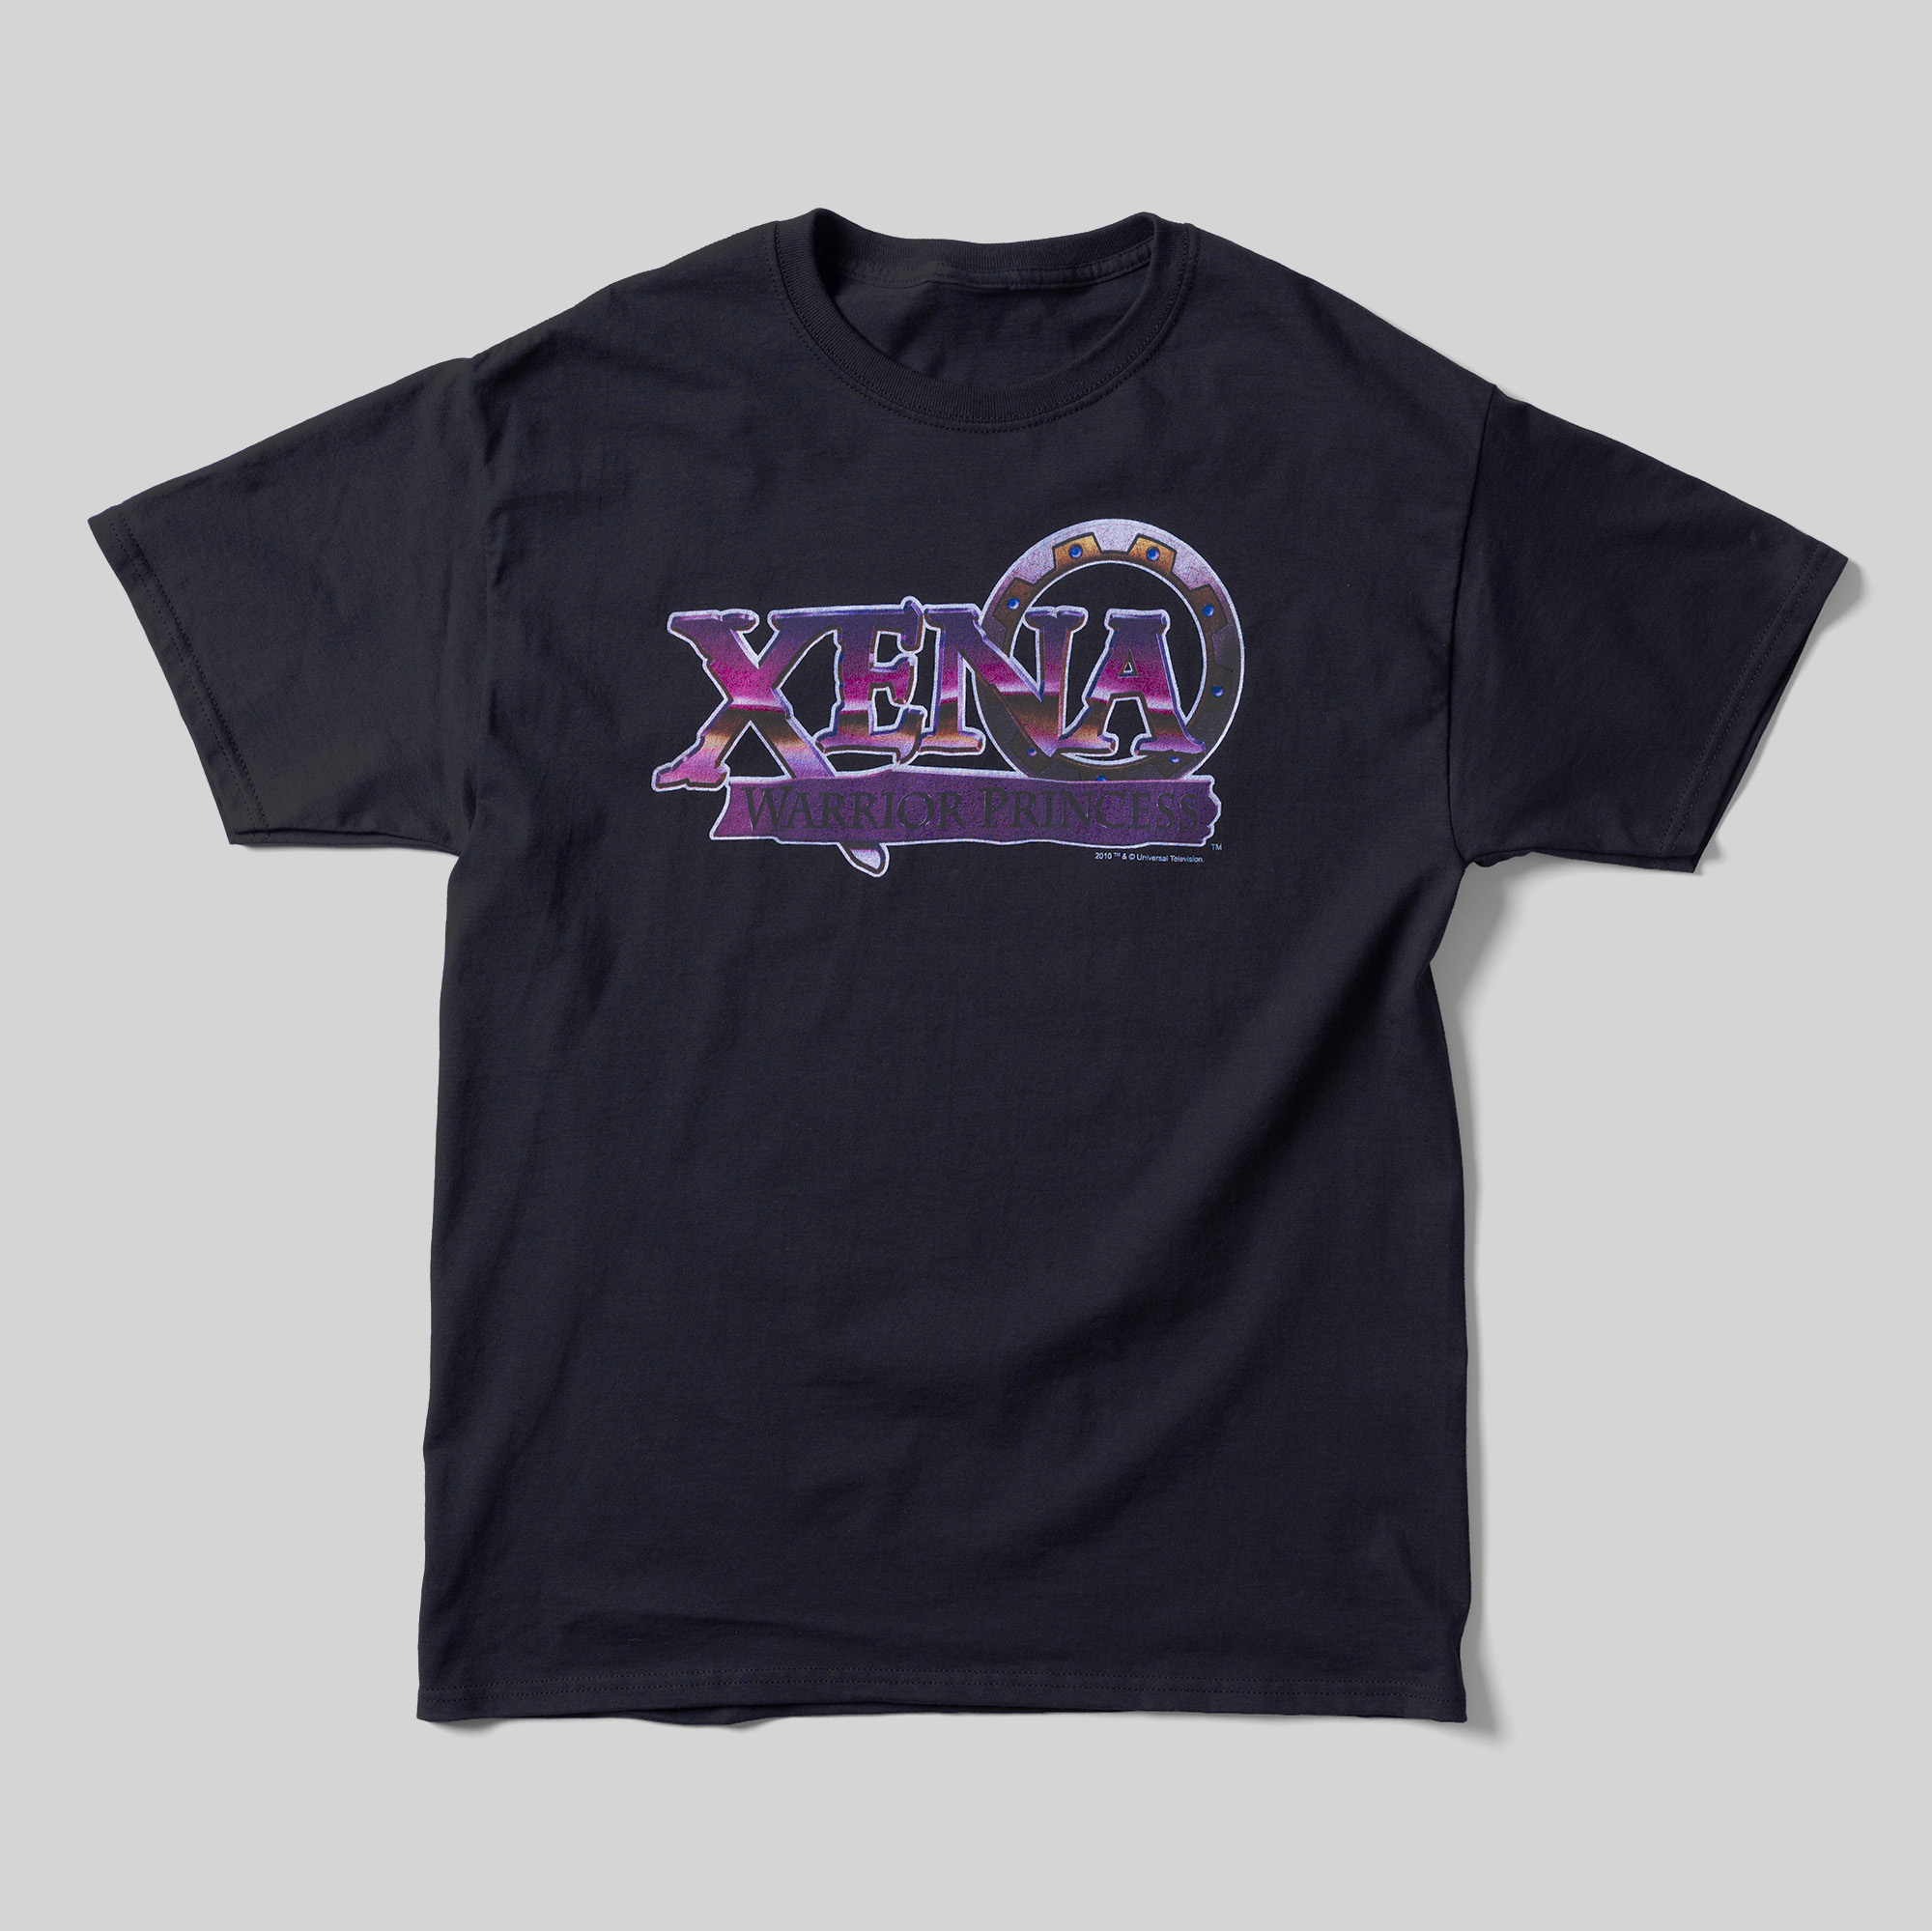 A black t-shirt with the logo for Xena: Warrior Princess.